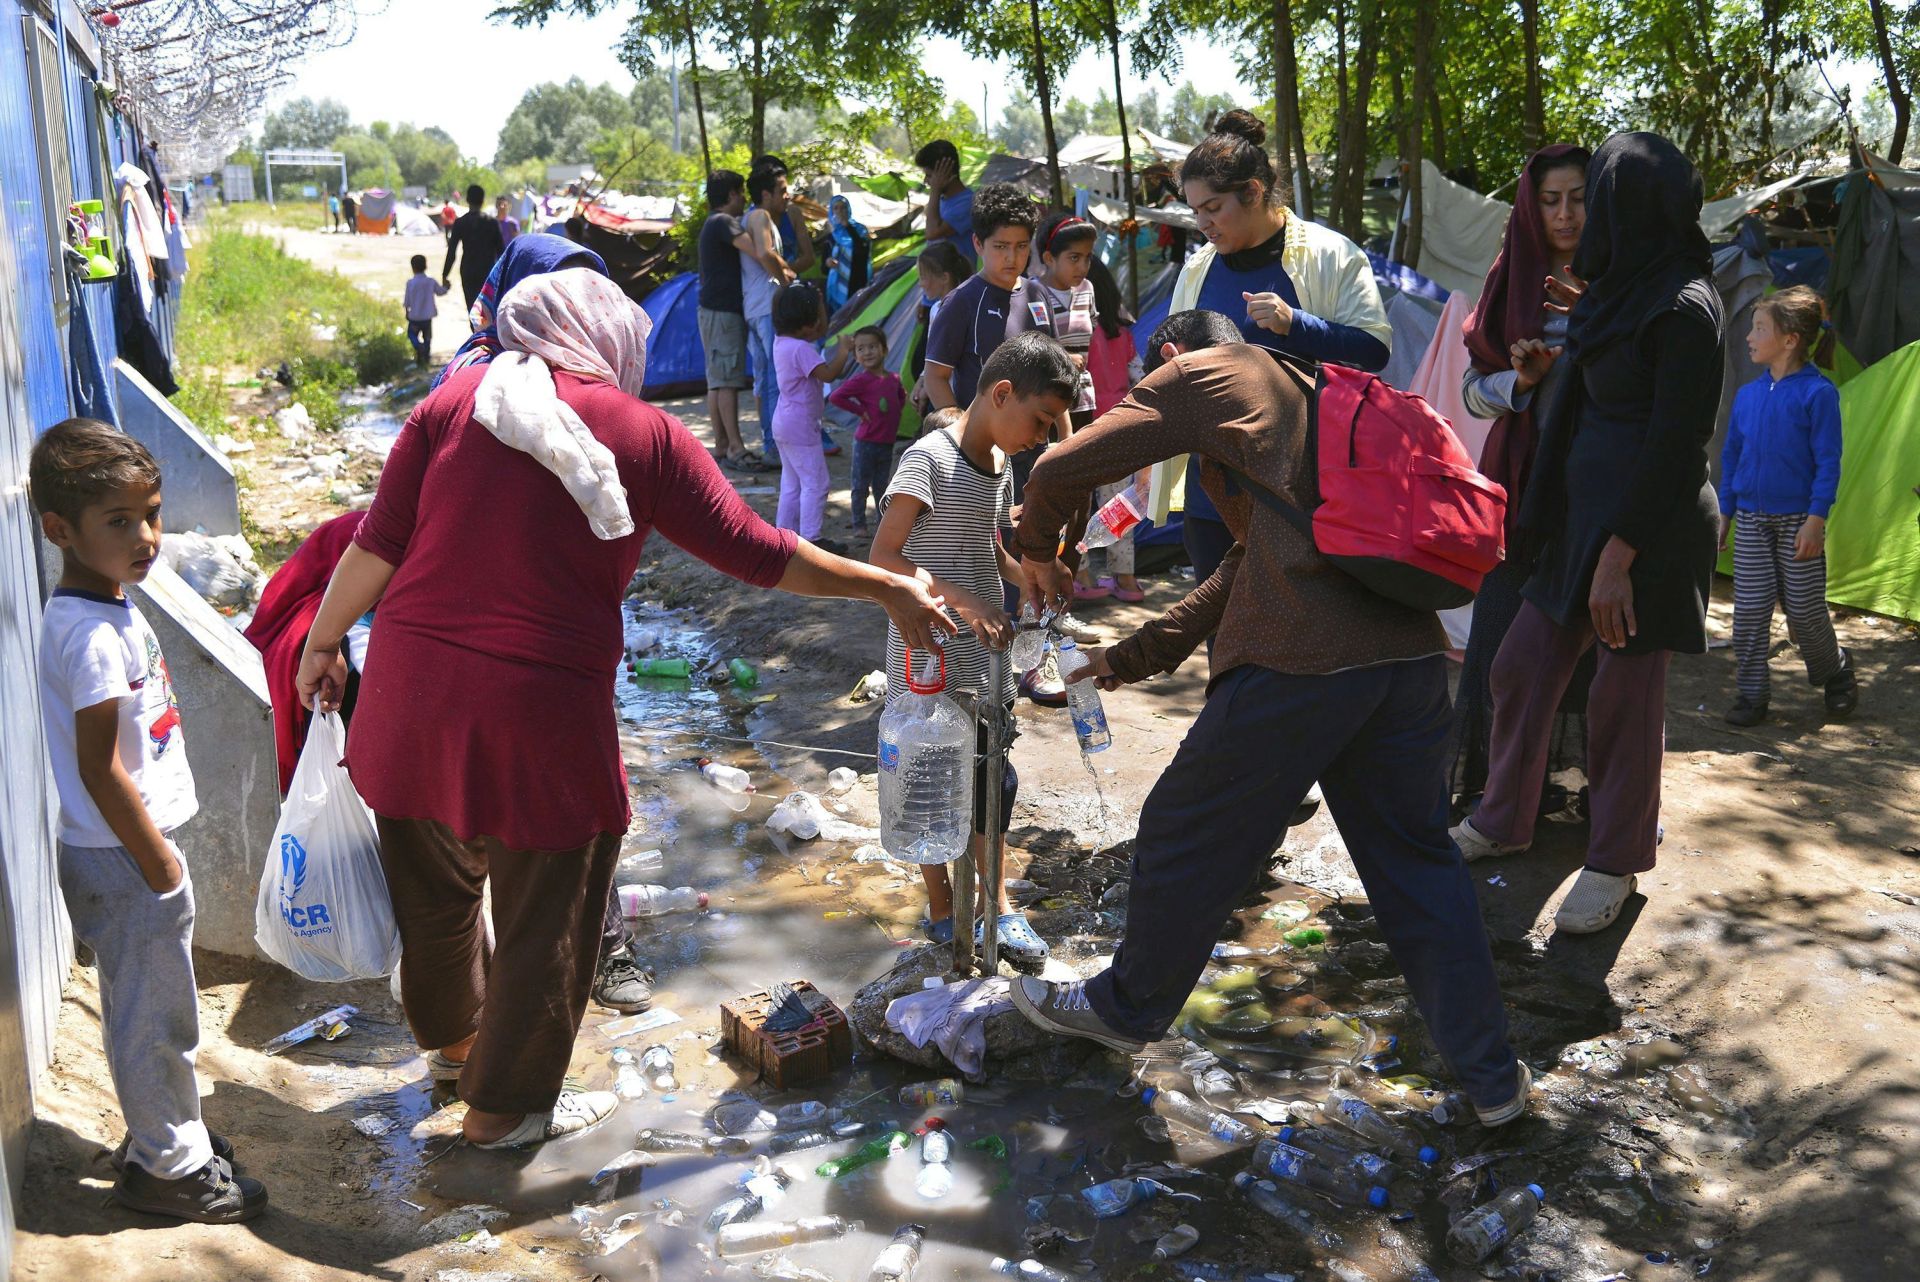 epa05421063 Migrants take water from a tap near the Hungarian border at Horgos, northern Serbia, 11 July 2016. After Hungary had completely sealed its borders in a move that was criticised by the United Nations High Commissioner for Refugees, UNHCR, many migrants are uncertain about how they could get to their desired destinations in the EU. According to media reports more than a million people had used the so-called Balkan-Route to western European countries before some countries took measures to close their borders for the stream of migrants.  EPA/EDVARD MOLNAR HUNGARY OUT